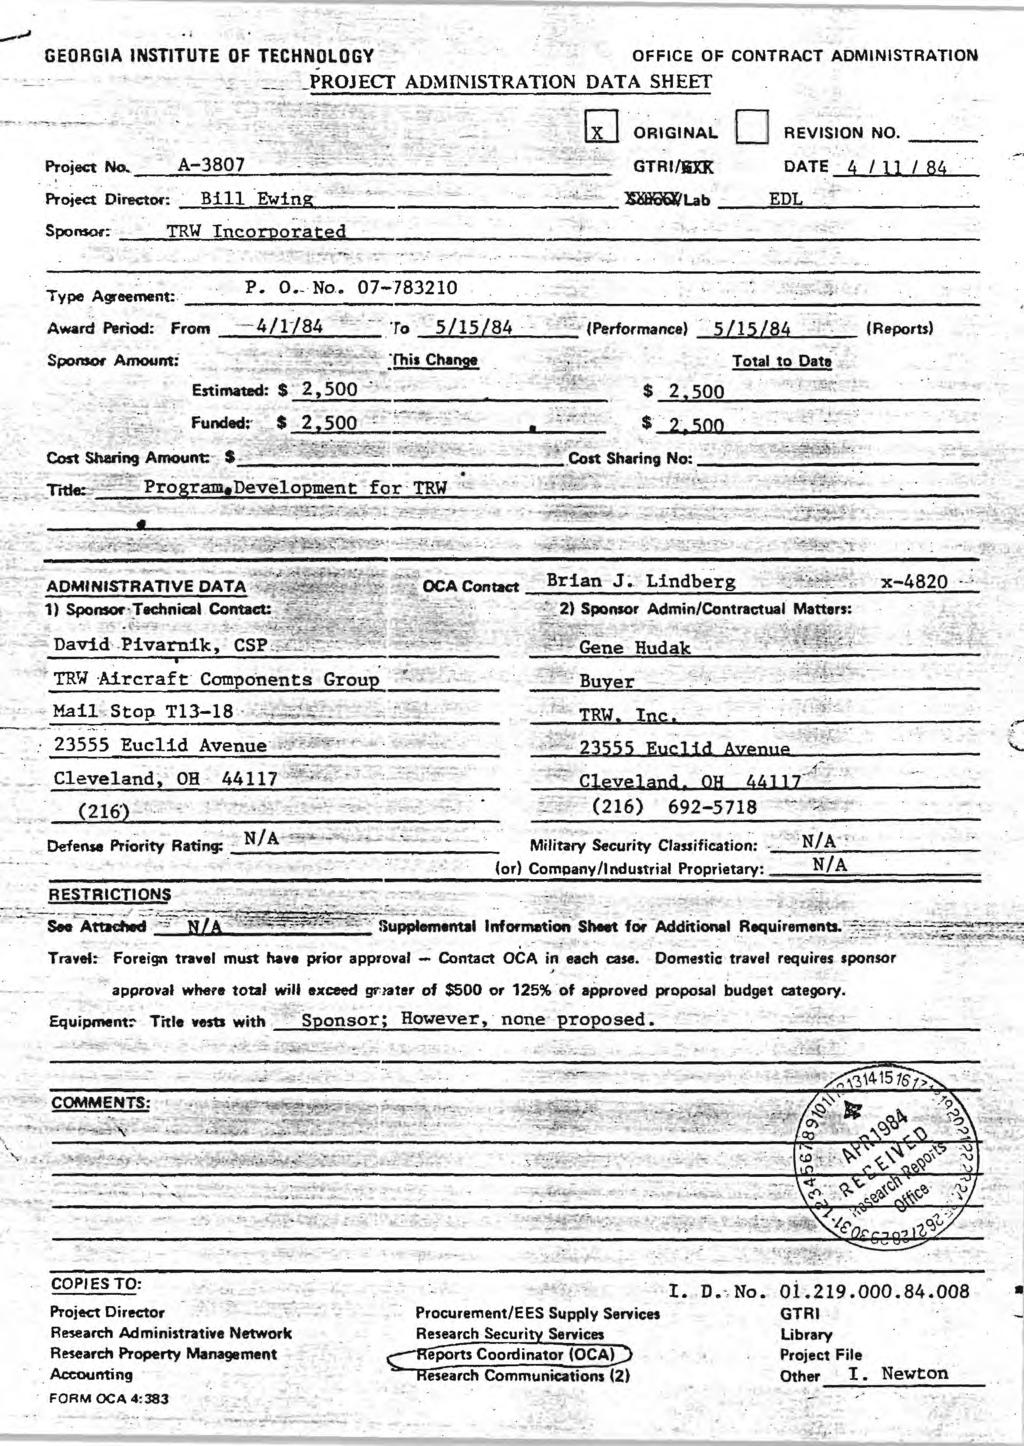 GEORGIA INSTITUTE OF TECHNOLOGY PROJECT ADMINISTRATION DATA SHEET OFFICE OF CONTRACT ADMINISTRATION Project No, A-3807 Project Director: Sponsor: Bill Ewing TRW Incorporated ORIGINAL GTRI/IiiKR